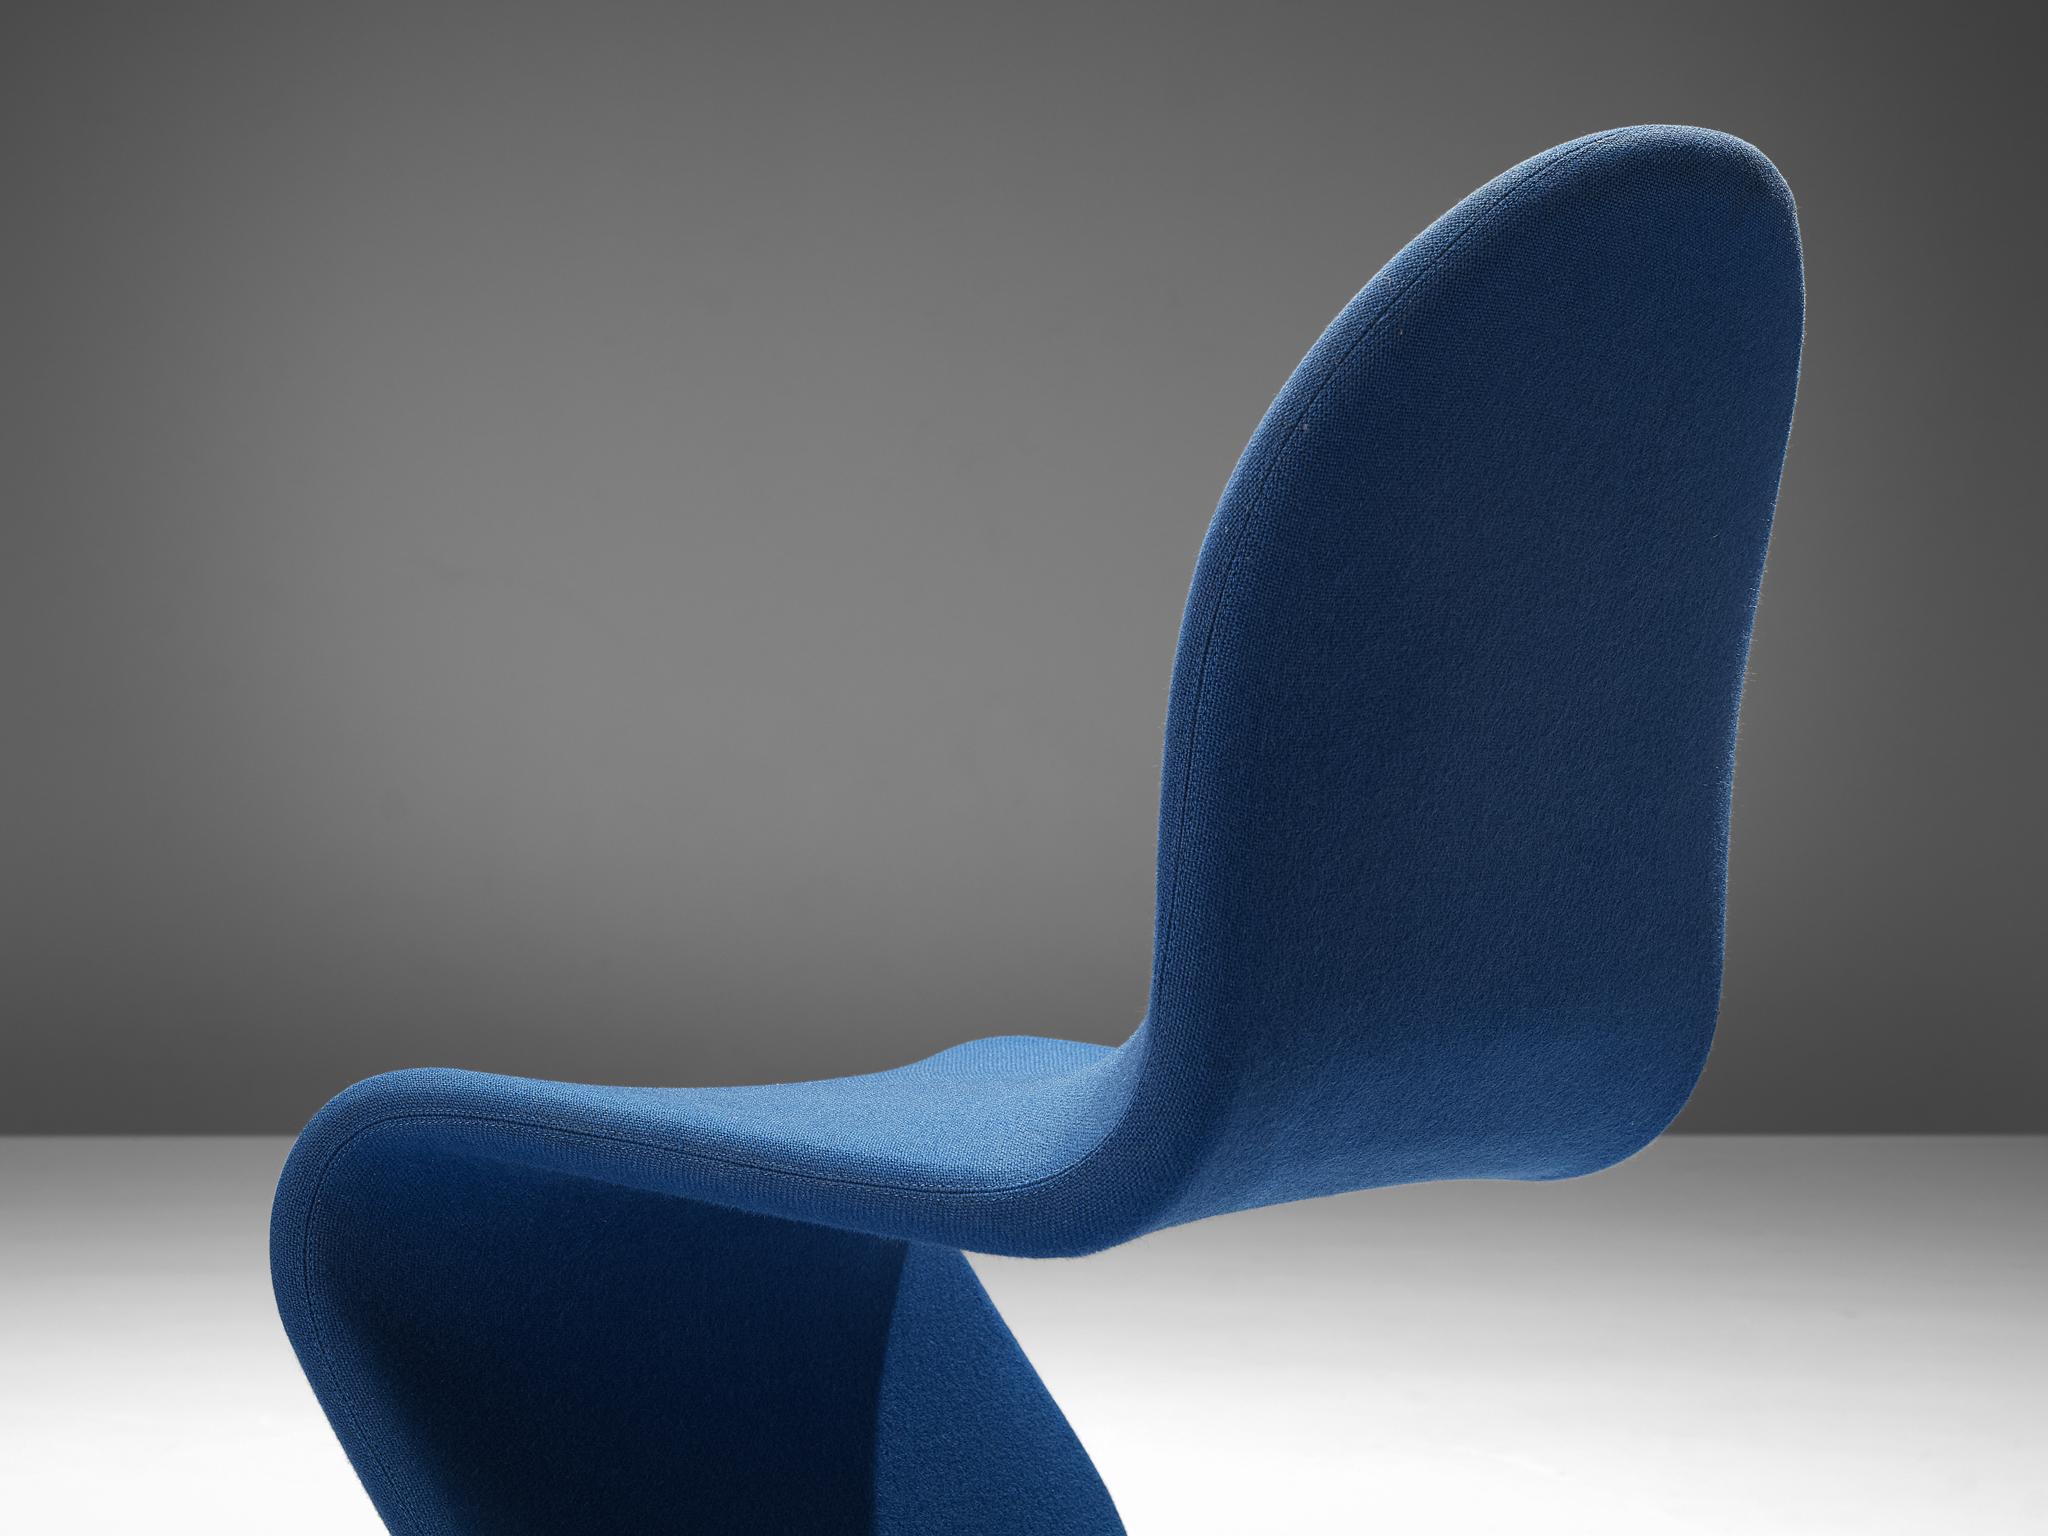 Late 20th Century Verner Panton for Fritz Hansen 'Chair a' Chair in Blue Upholstery